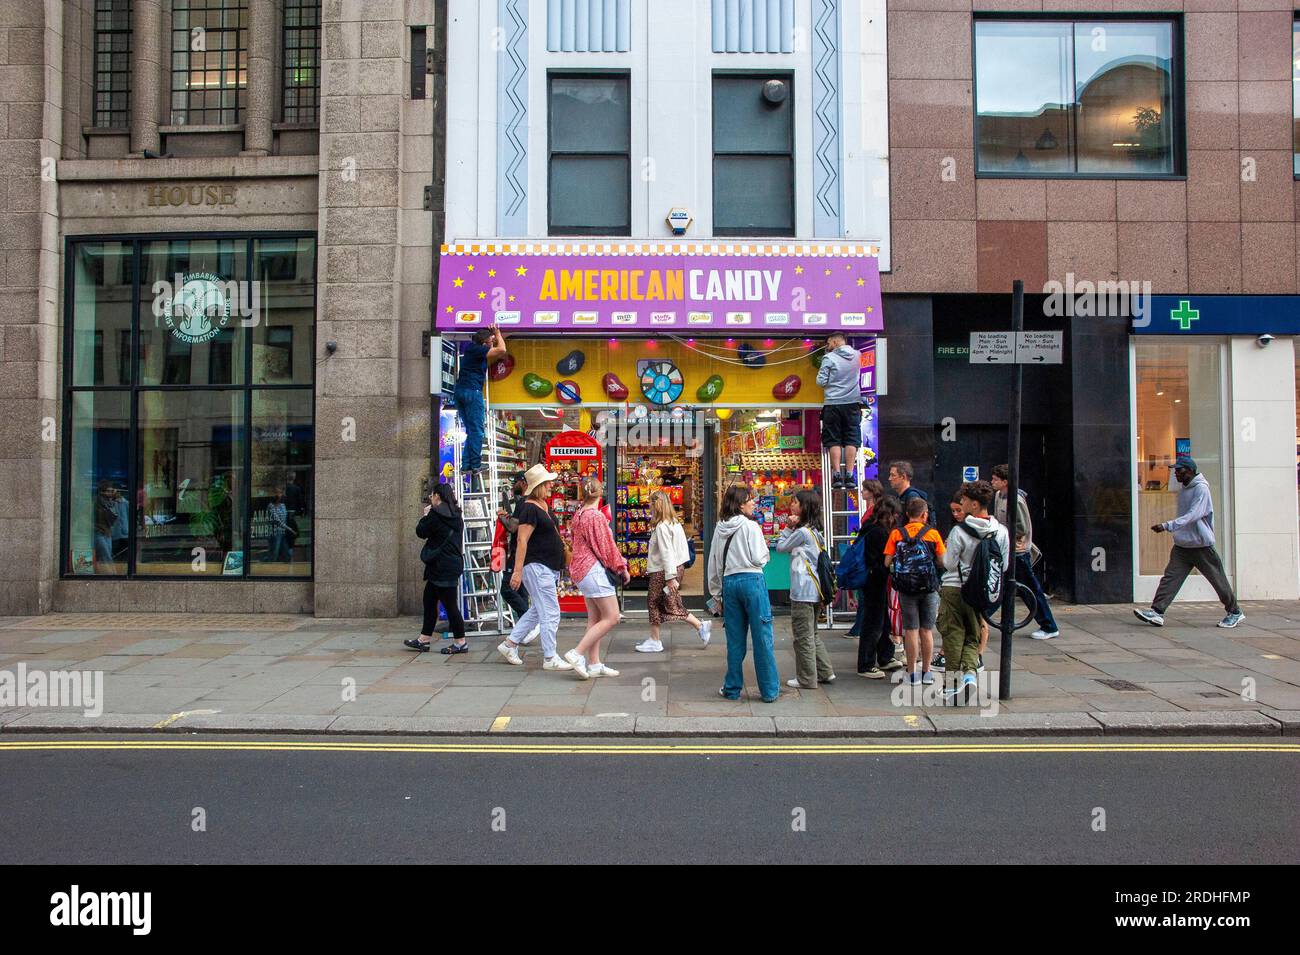 London, UK. 21st July, 2023. American candy store opens in The Strand in London's West End. This i s the first on this major road. Controversy continues over similar shops opening in Oxford street with allegations of illegal activities such as counterfeit goods, money laundering and unpaid business rates. Credit: JOHNNY ARMSTEAD/Alamy Live News Stock Photo